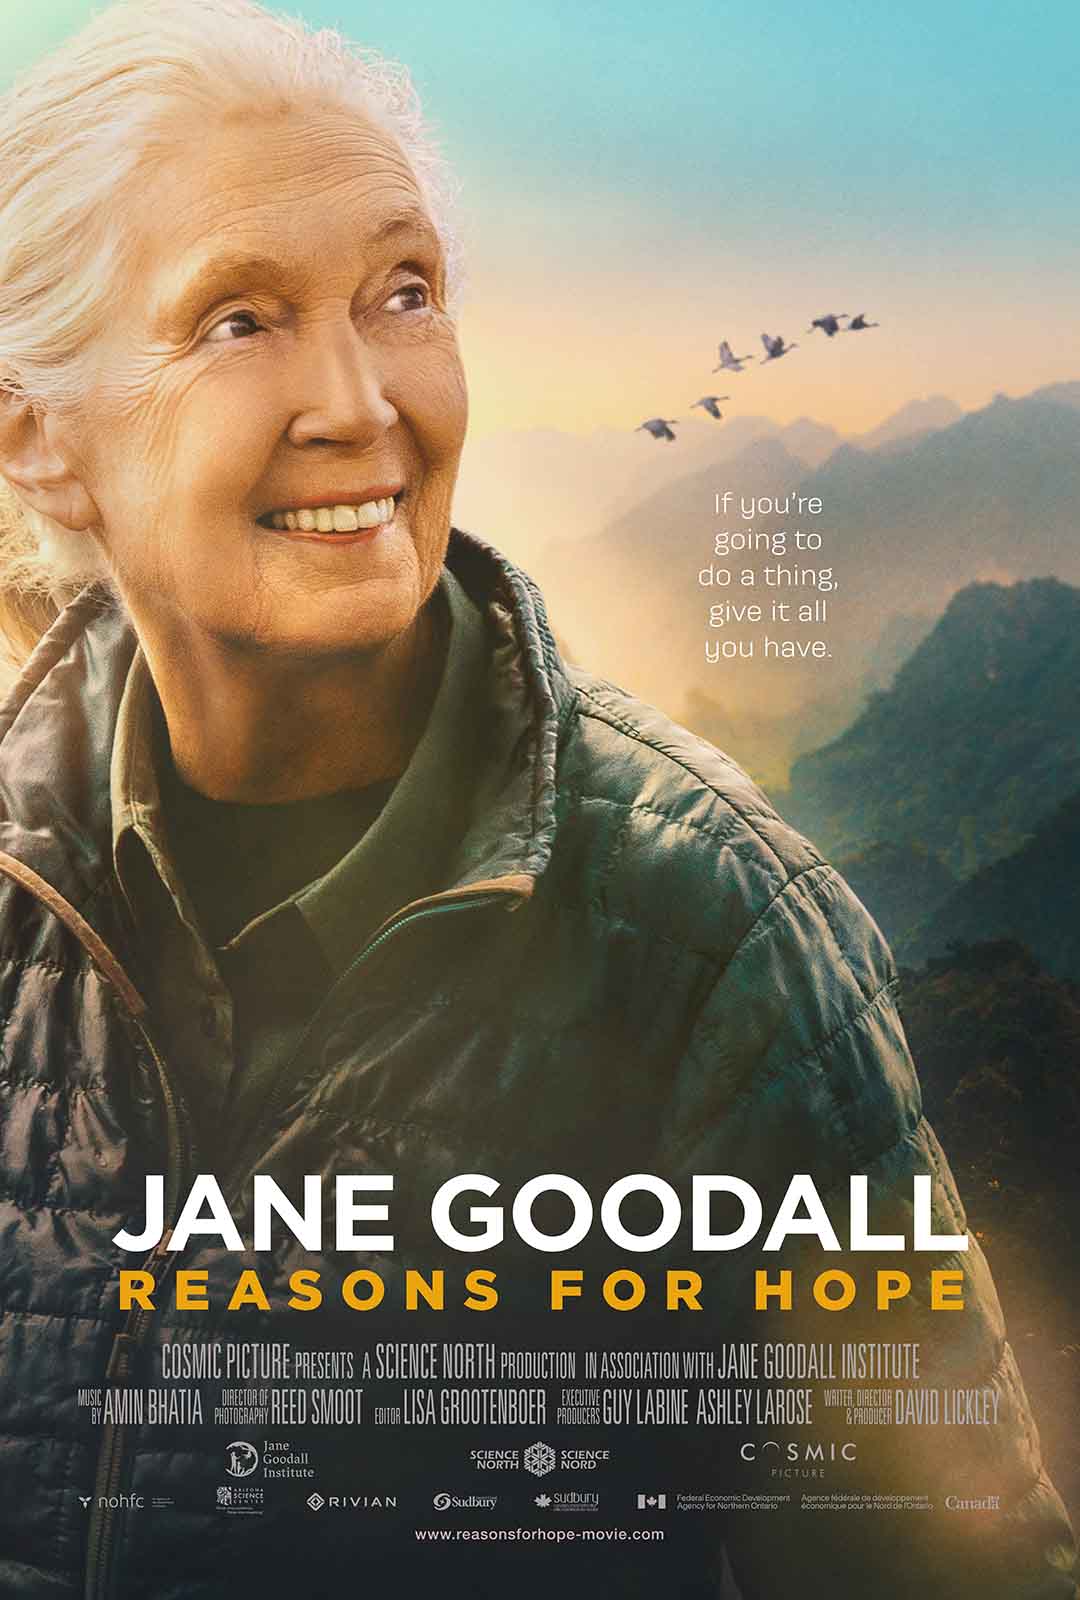 Jane Goodall on the web poster for Jane Goodall: Reasons for All